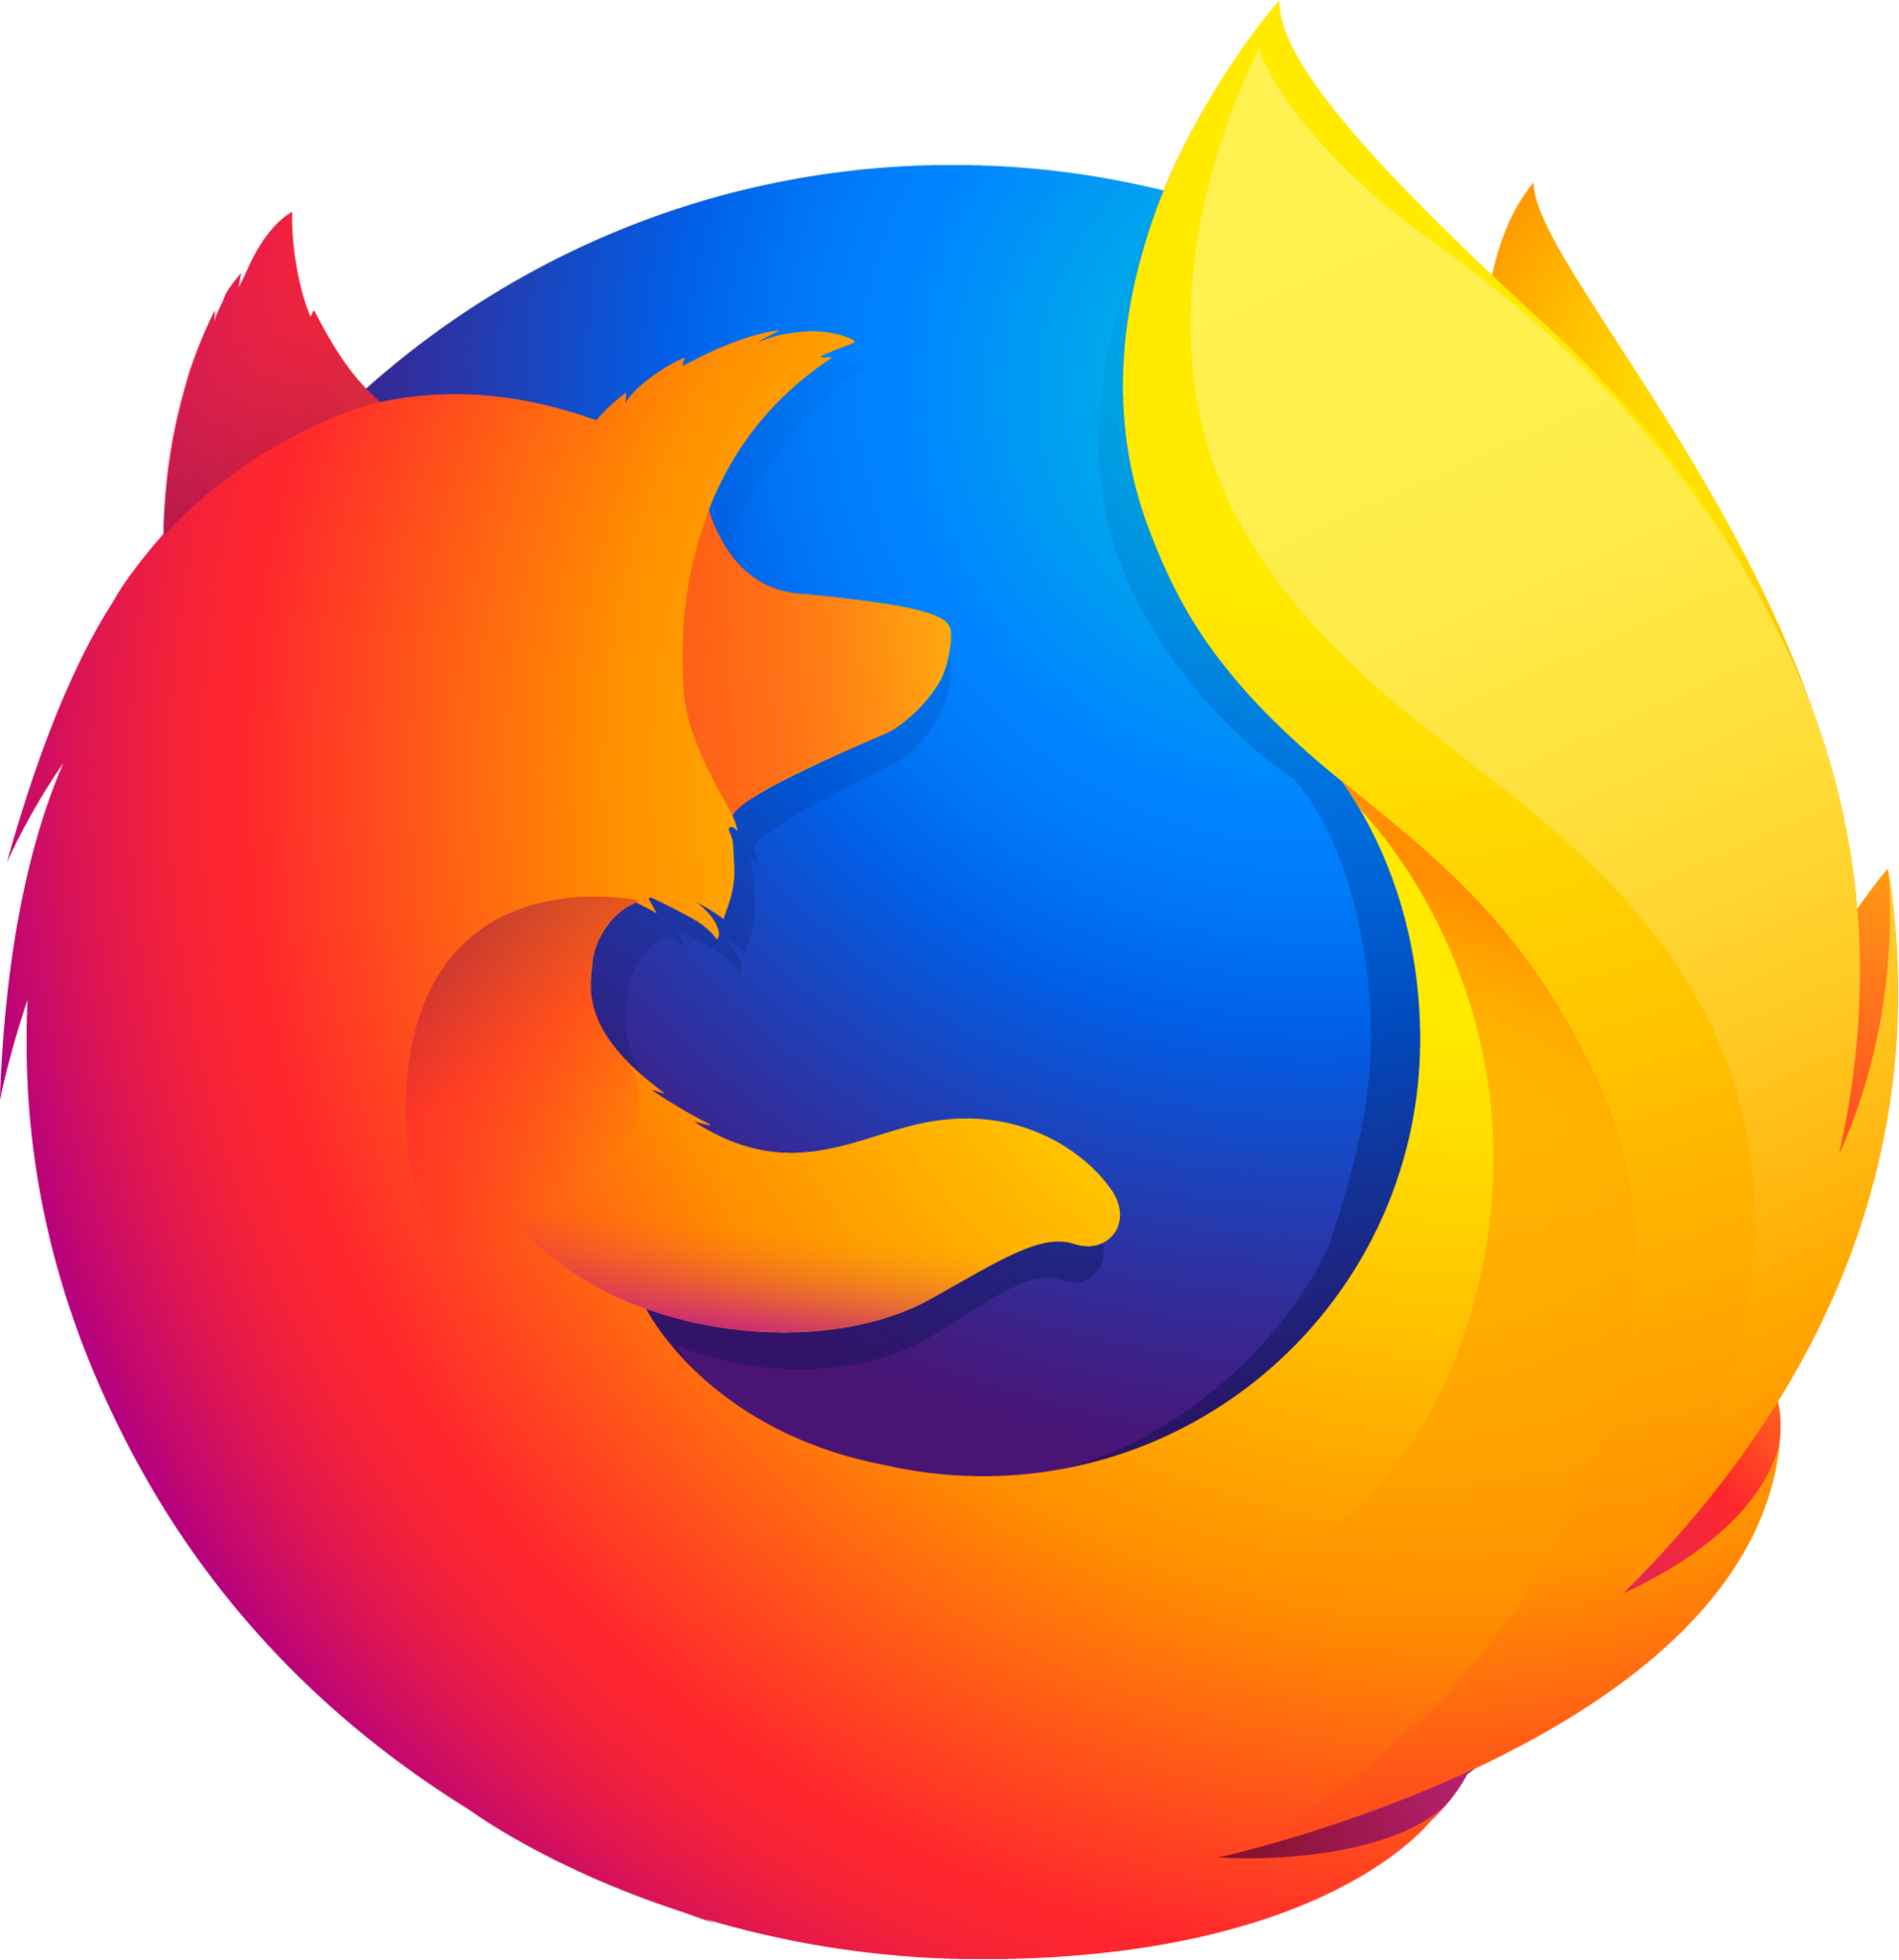 https://www.androidcentral.com/sites/androidcentral.com/files/article_images/2019/07/firefox-browser-logo.png?itok=qnK8N3ug